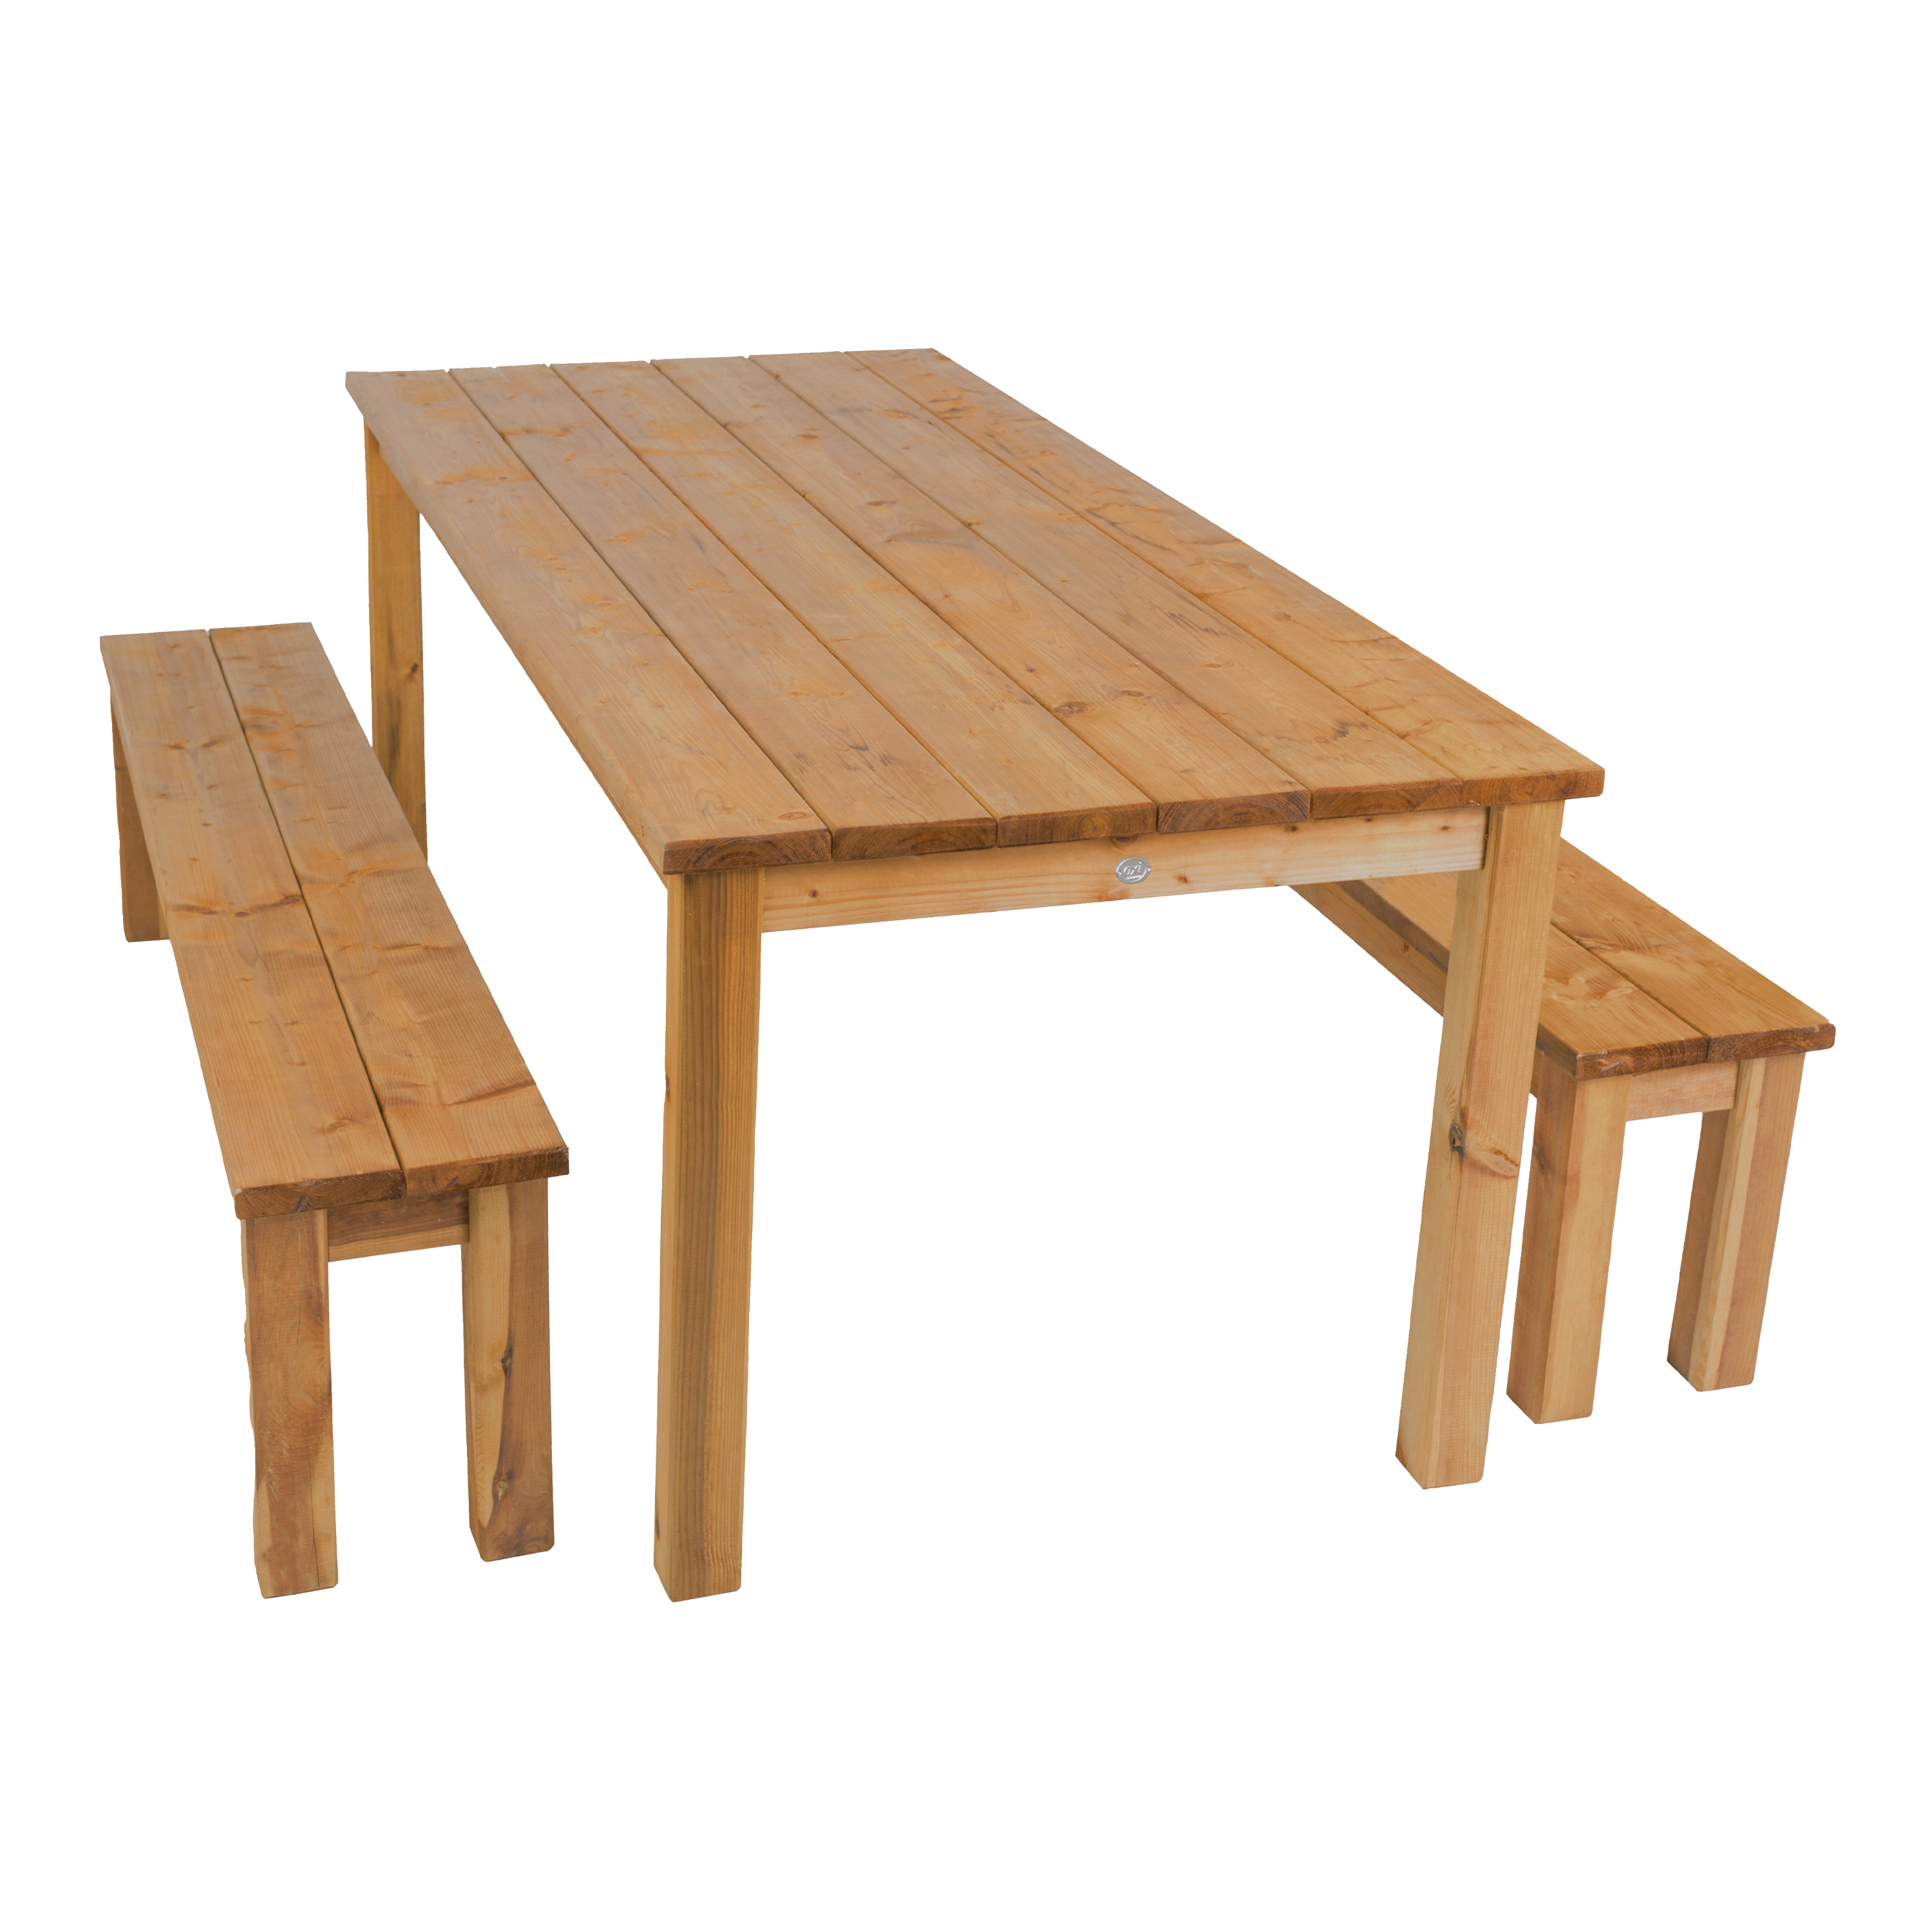 Louise Wooden Picnic Table and Bench Set 200 cm - Brown